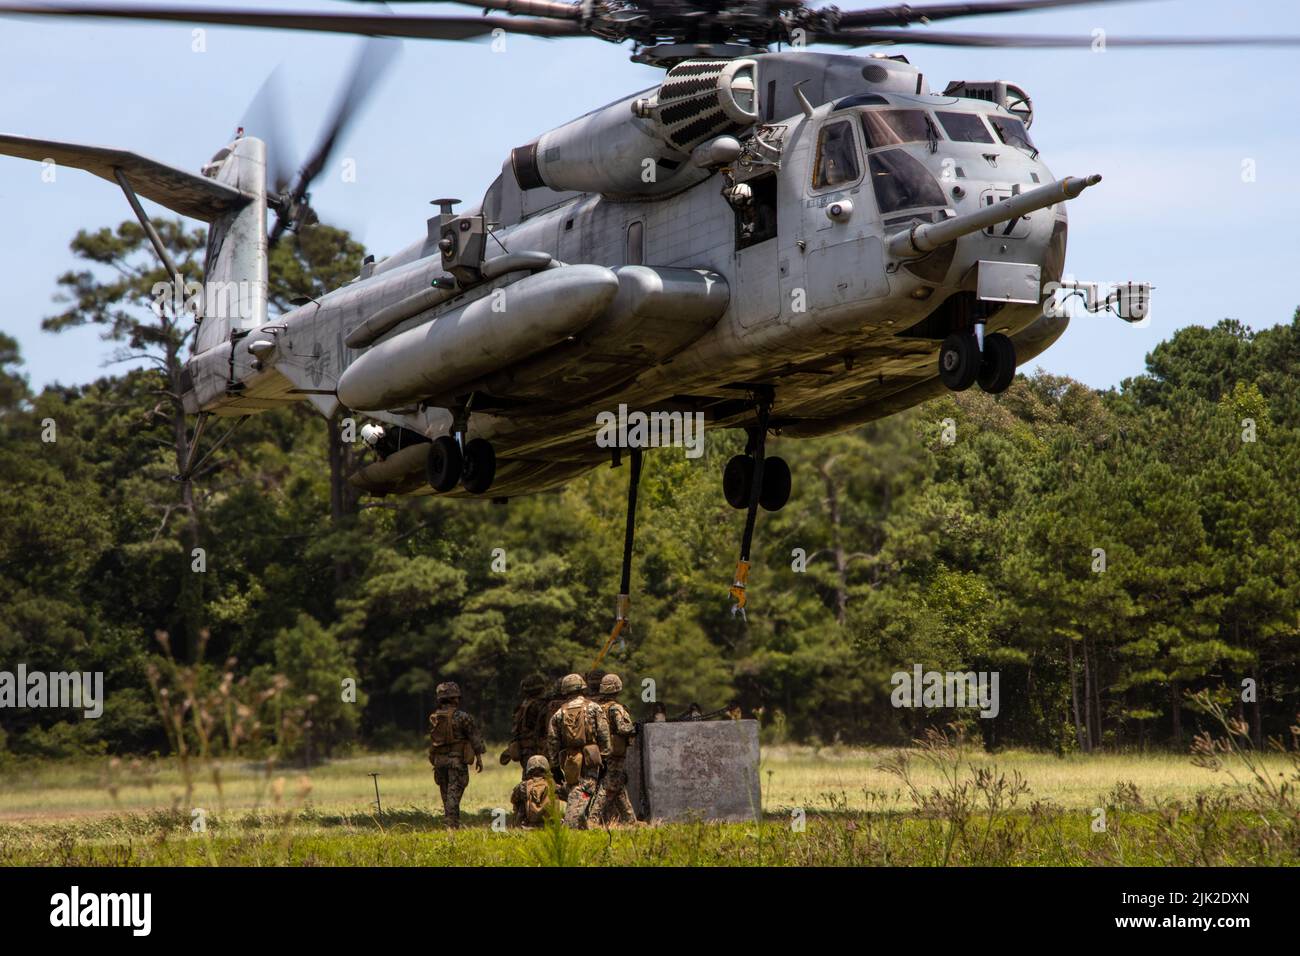 U.S. Marines assigned to Combat Logistics Battalion 24, 2d Marine Logistics Group, and a CH-53E Super Stallion assigned to Marine Heavy Helicopter Squadron 366, 2d Marine Aircraft Wing, conduct an external lift as part of Hide and Seek Exercise on Marine Corps Base Camp Lejeune, North Carolina, July 27, 2022. Hide and Seek Exercise is a field exercise hosted by 10th Marines, 2nd Marine Division that trains participants on signature management, communication, electronic warfare, cyberspace operations and intelligence collection, processing and dissemination in order to enable future operations Stock Photo